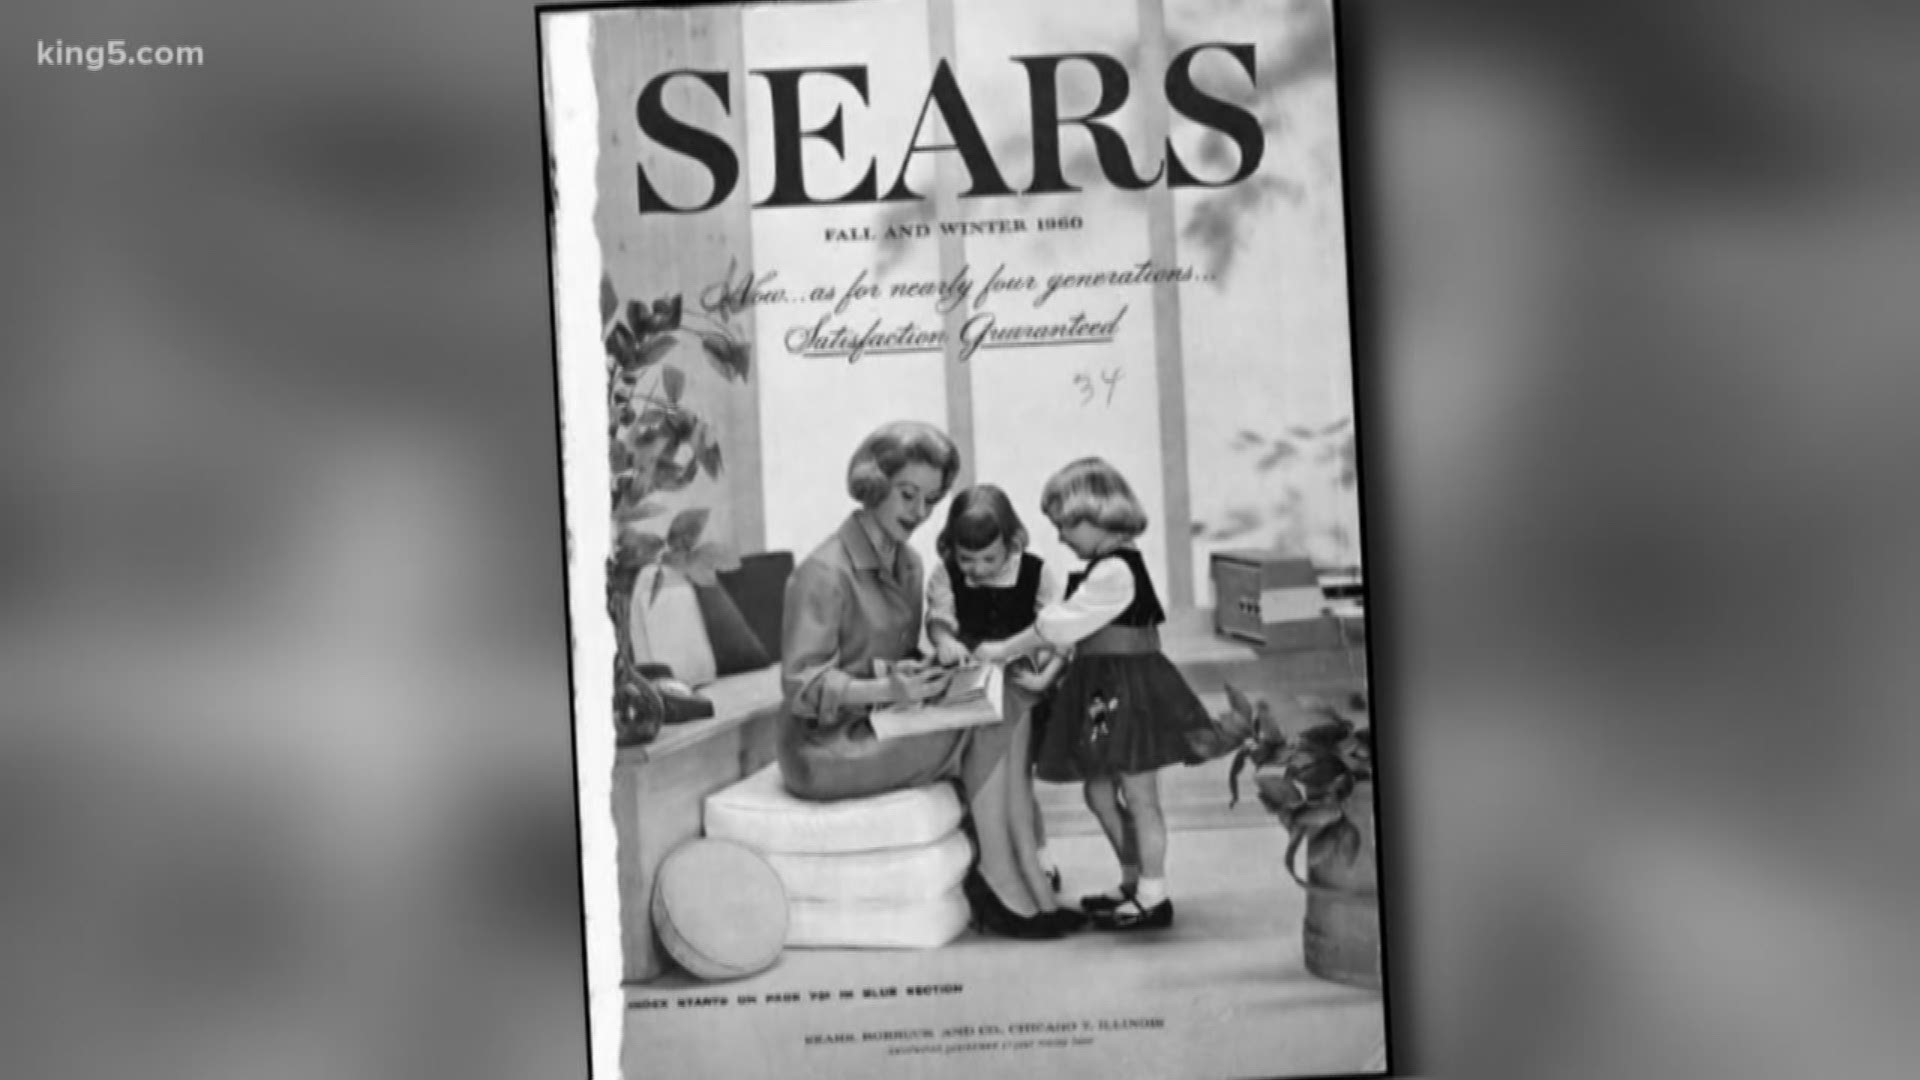 This weekend could mark the end of an empire. Multiple reports suggest Sears will declare bankruptcy after 125 years of business.